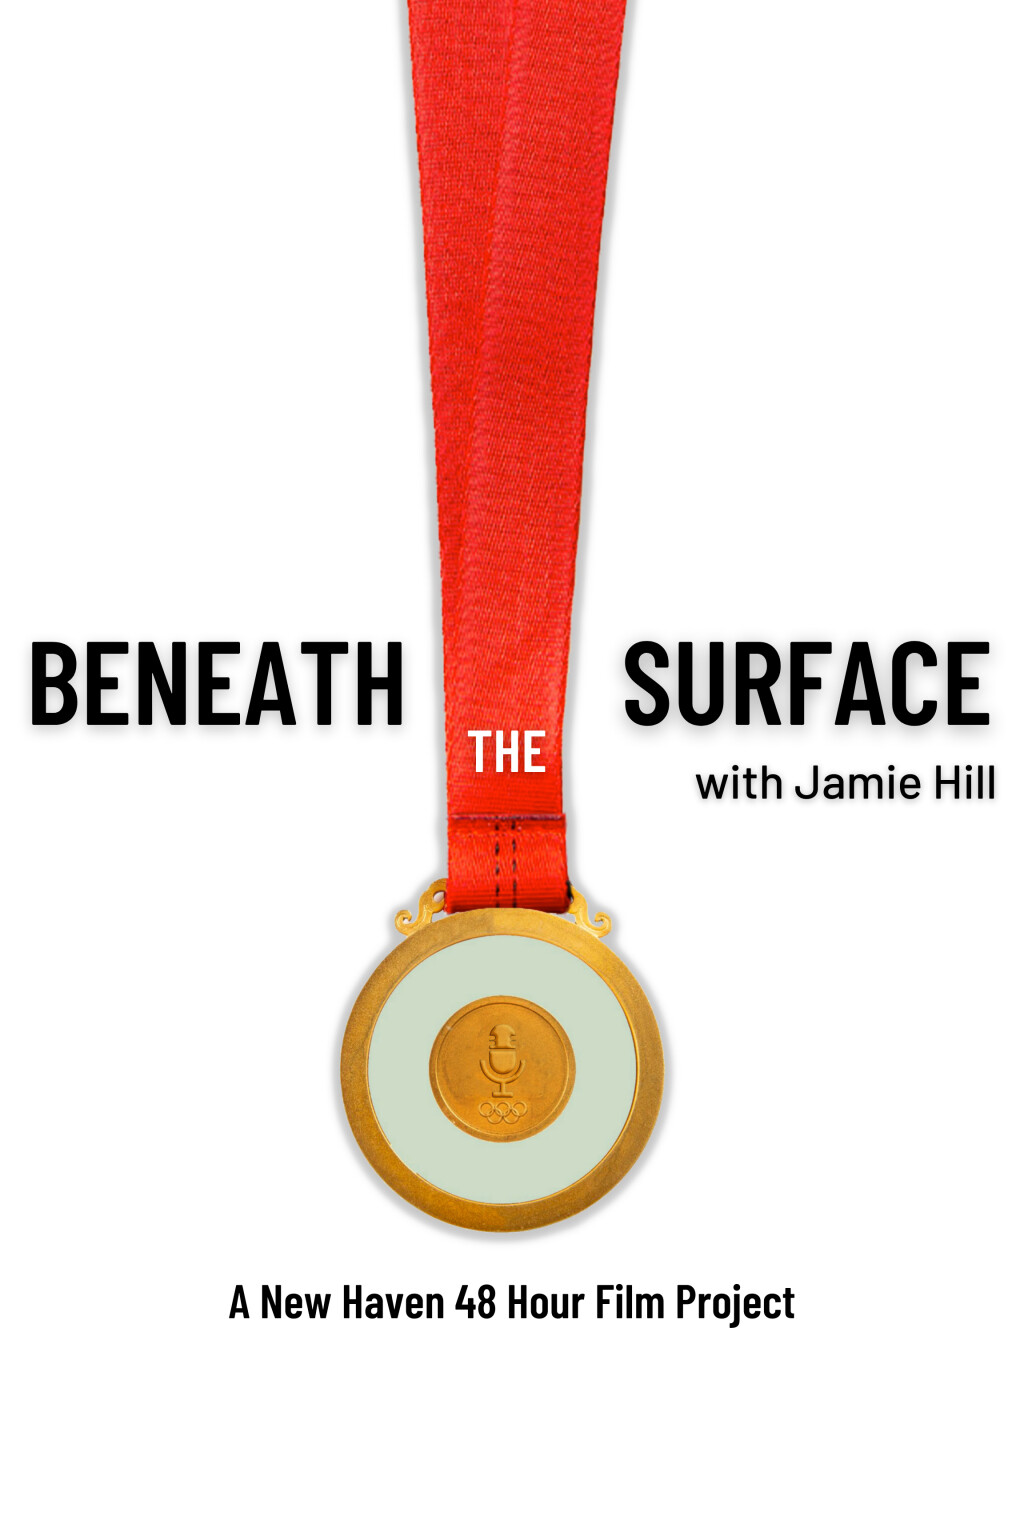 Filmposter for 'Beneath The Surface' with Jamie Hill